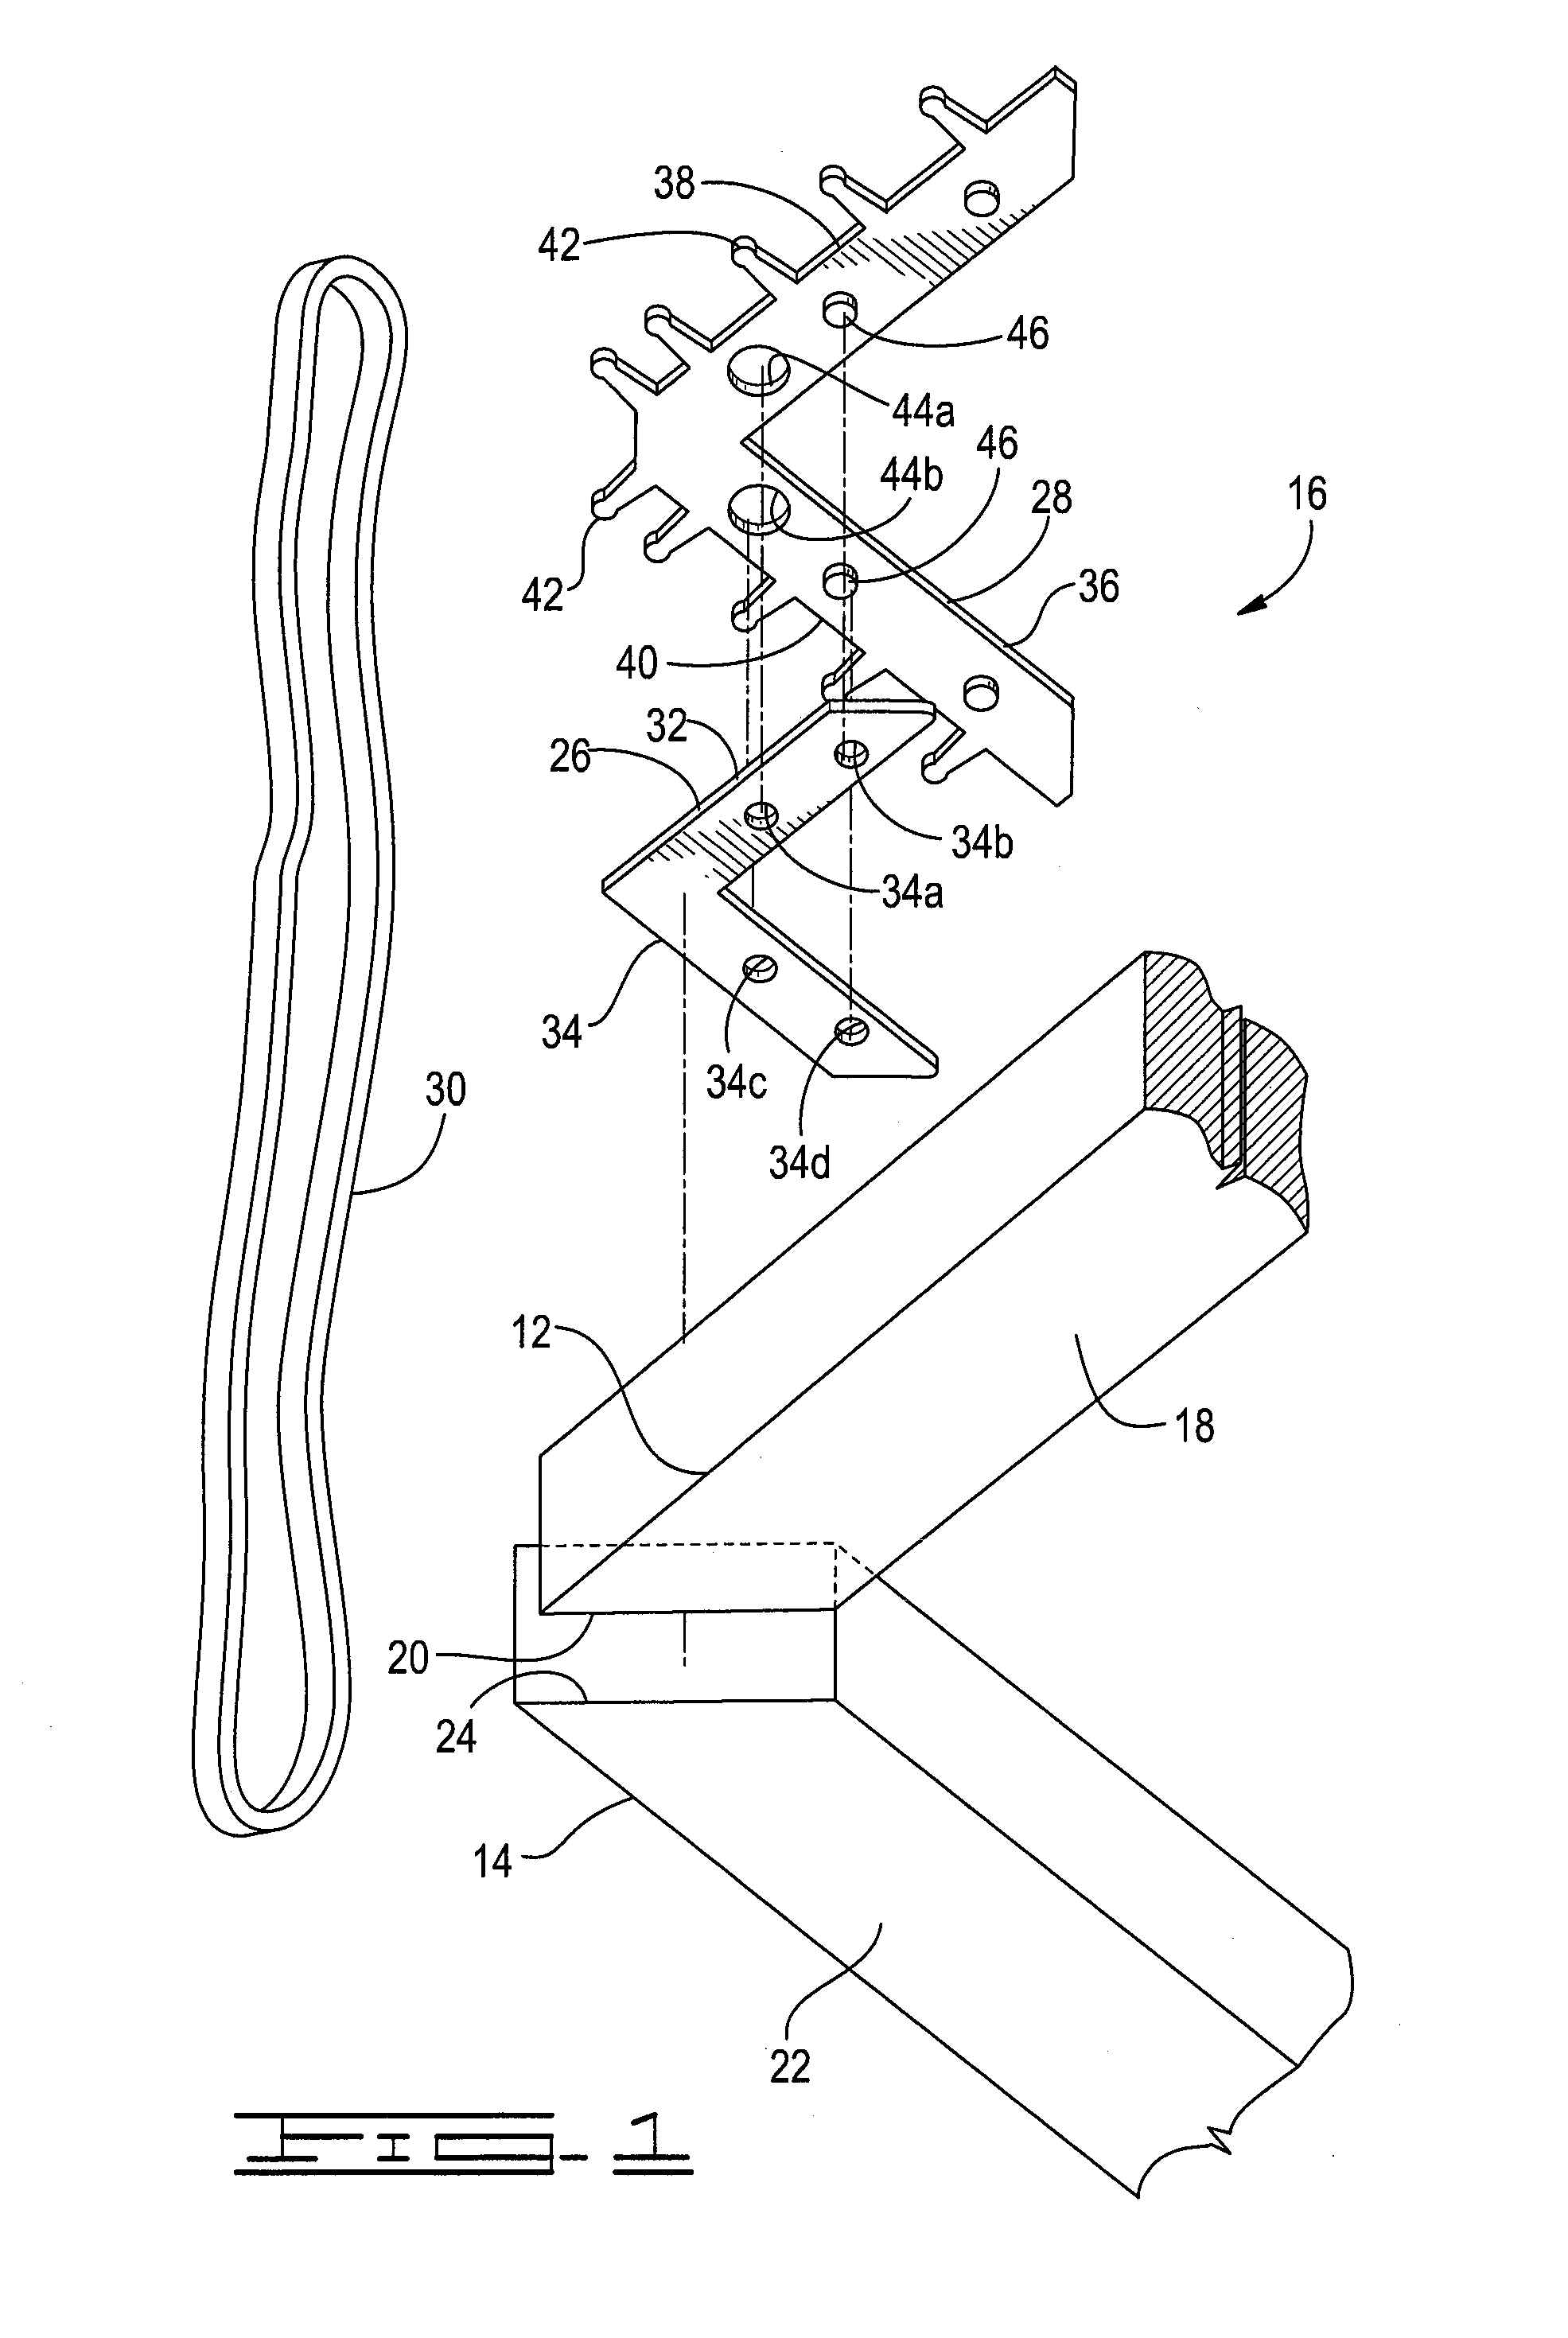 Apparatus and method for clamping mitered corners